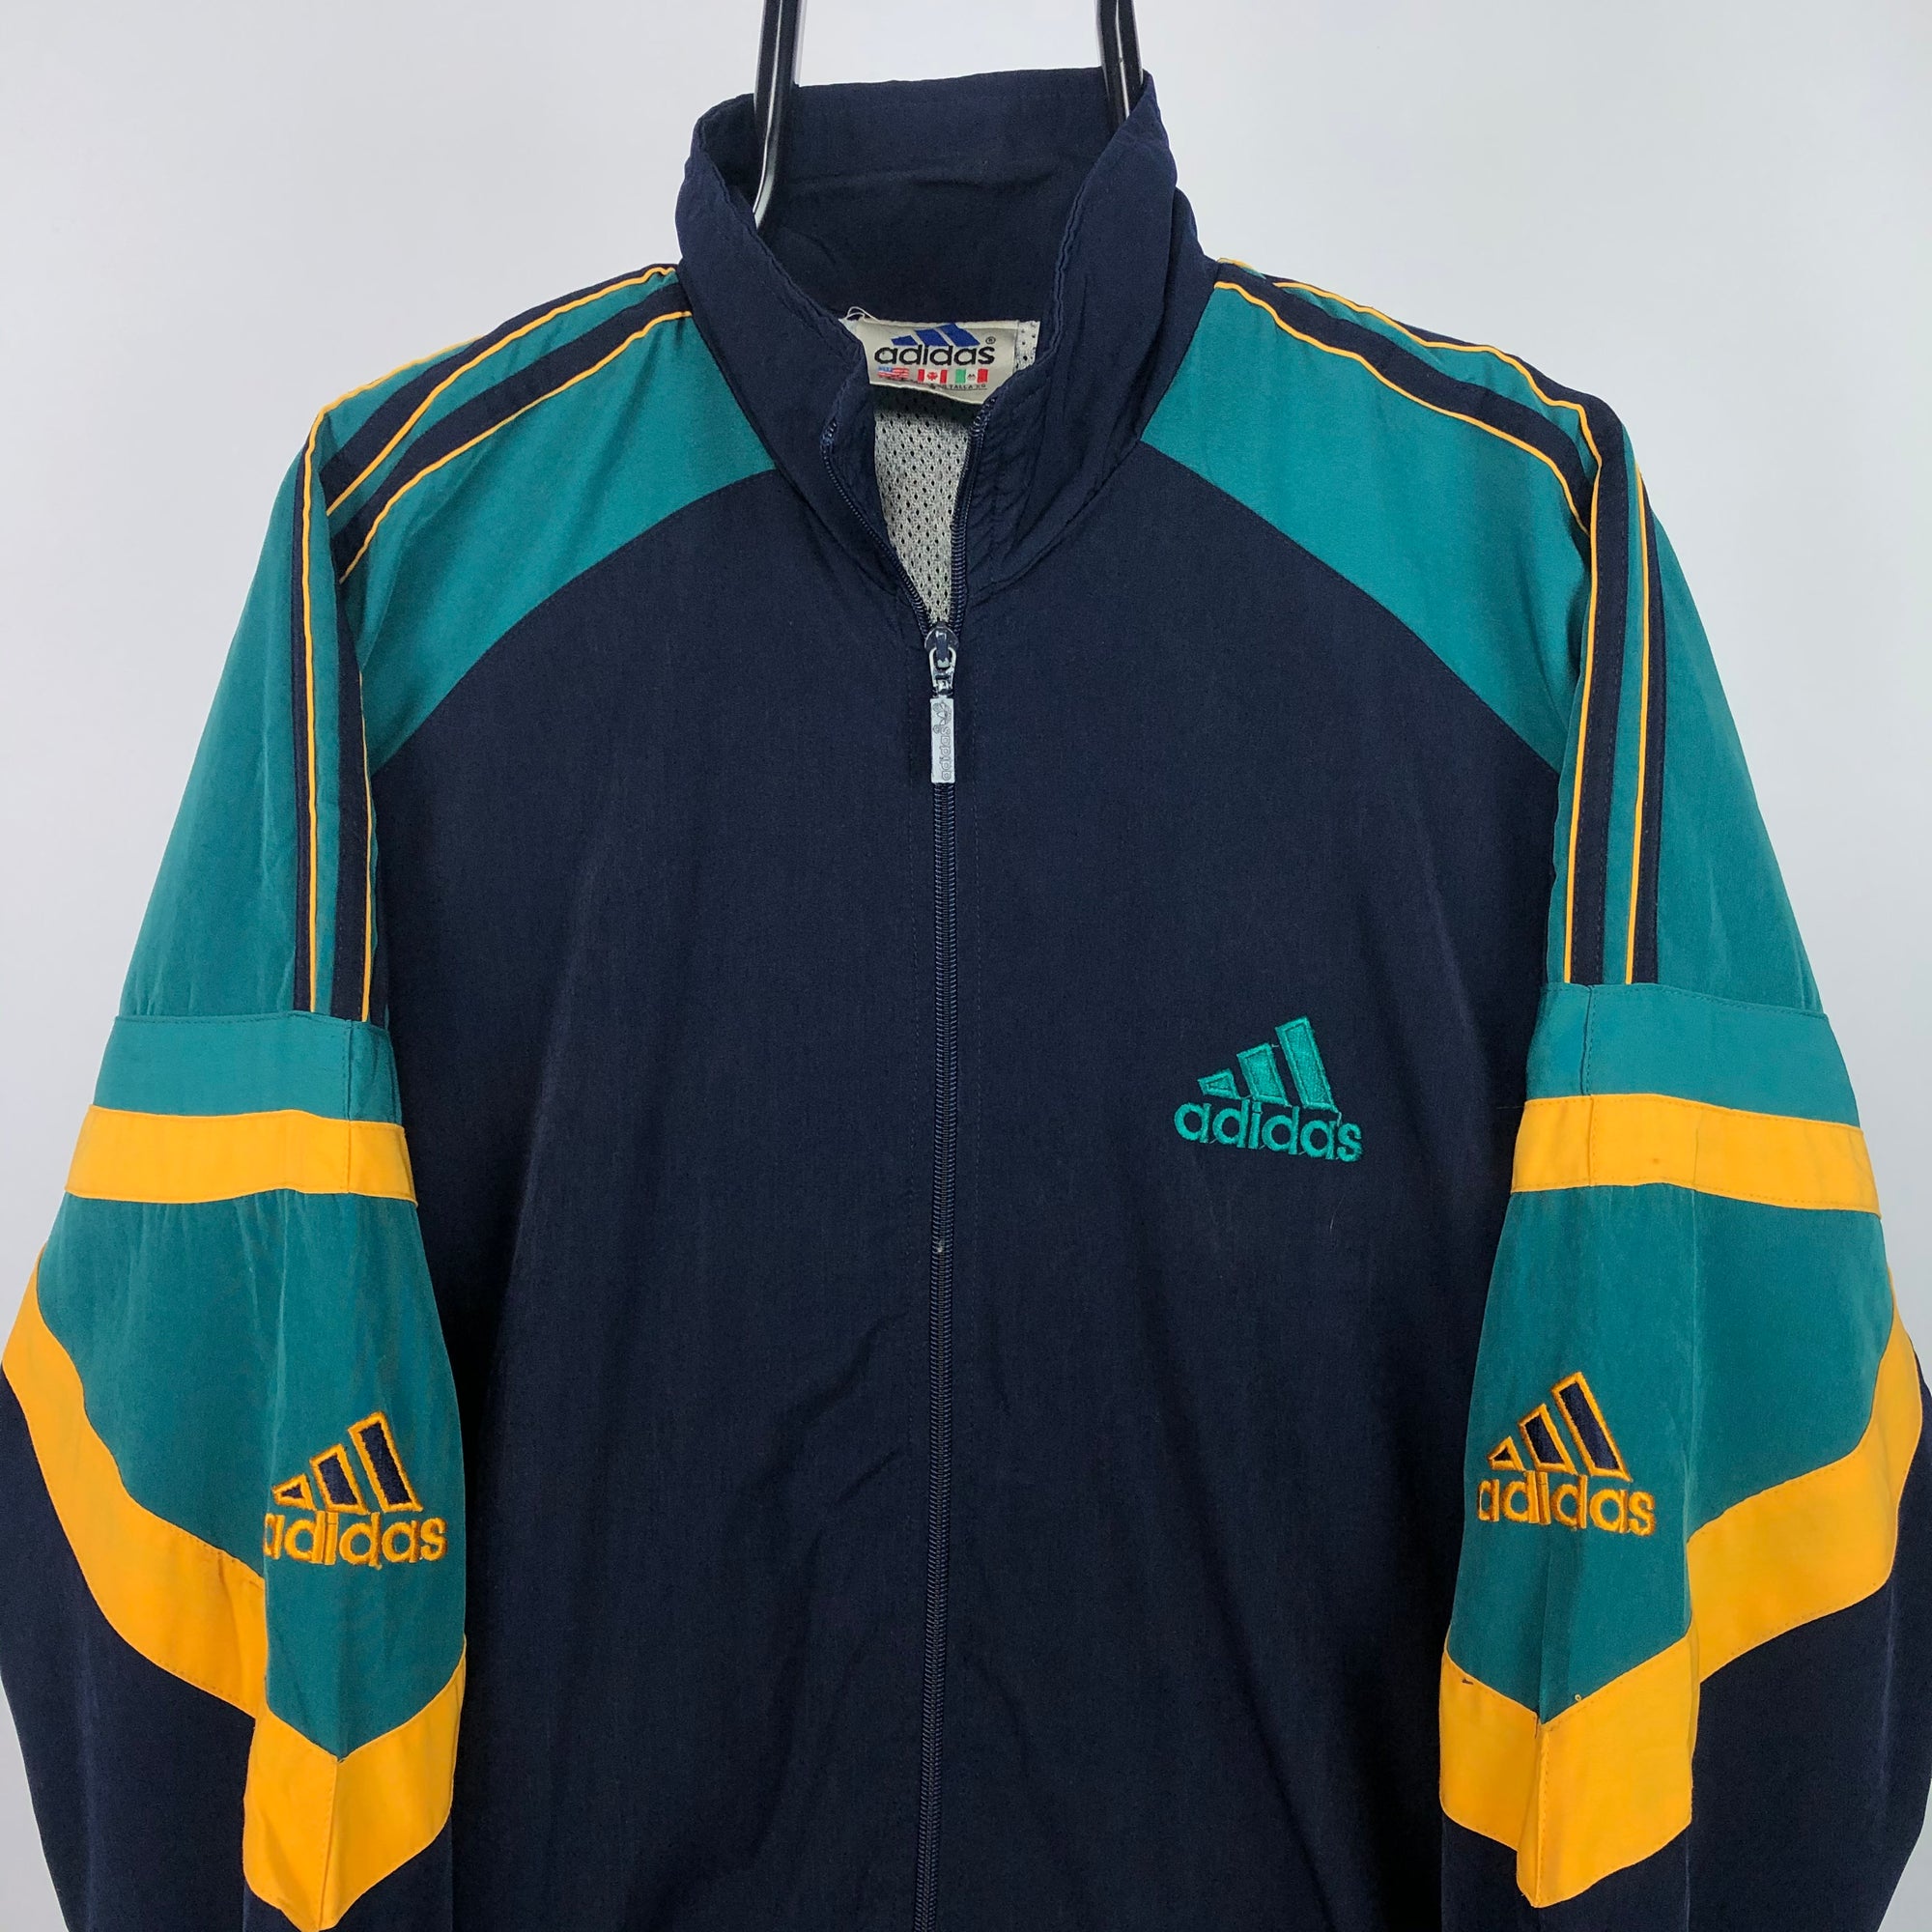 Vintage 90 Adidas Track Jacket in Navy/Green/Yellow - Men's Large/Women's XL